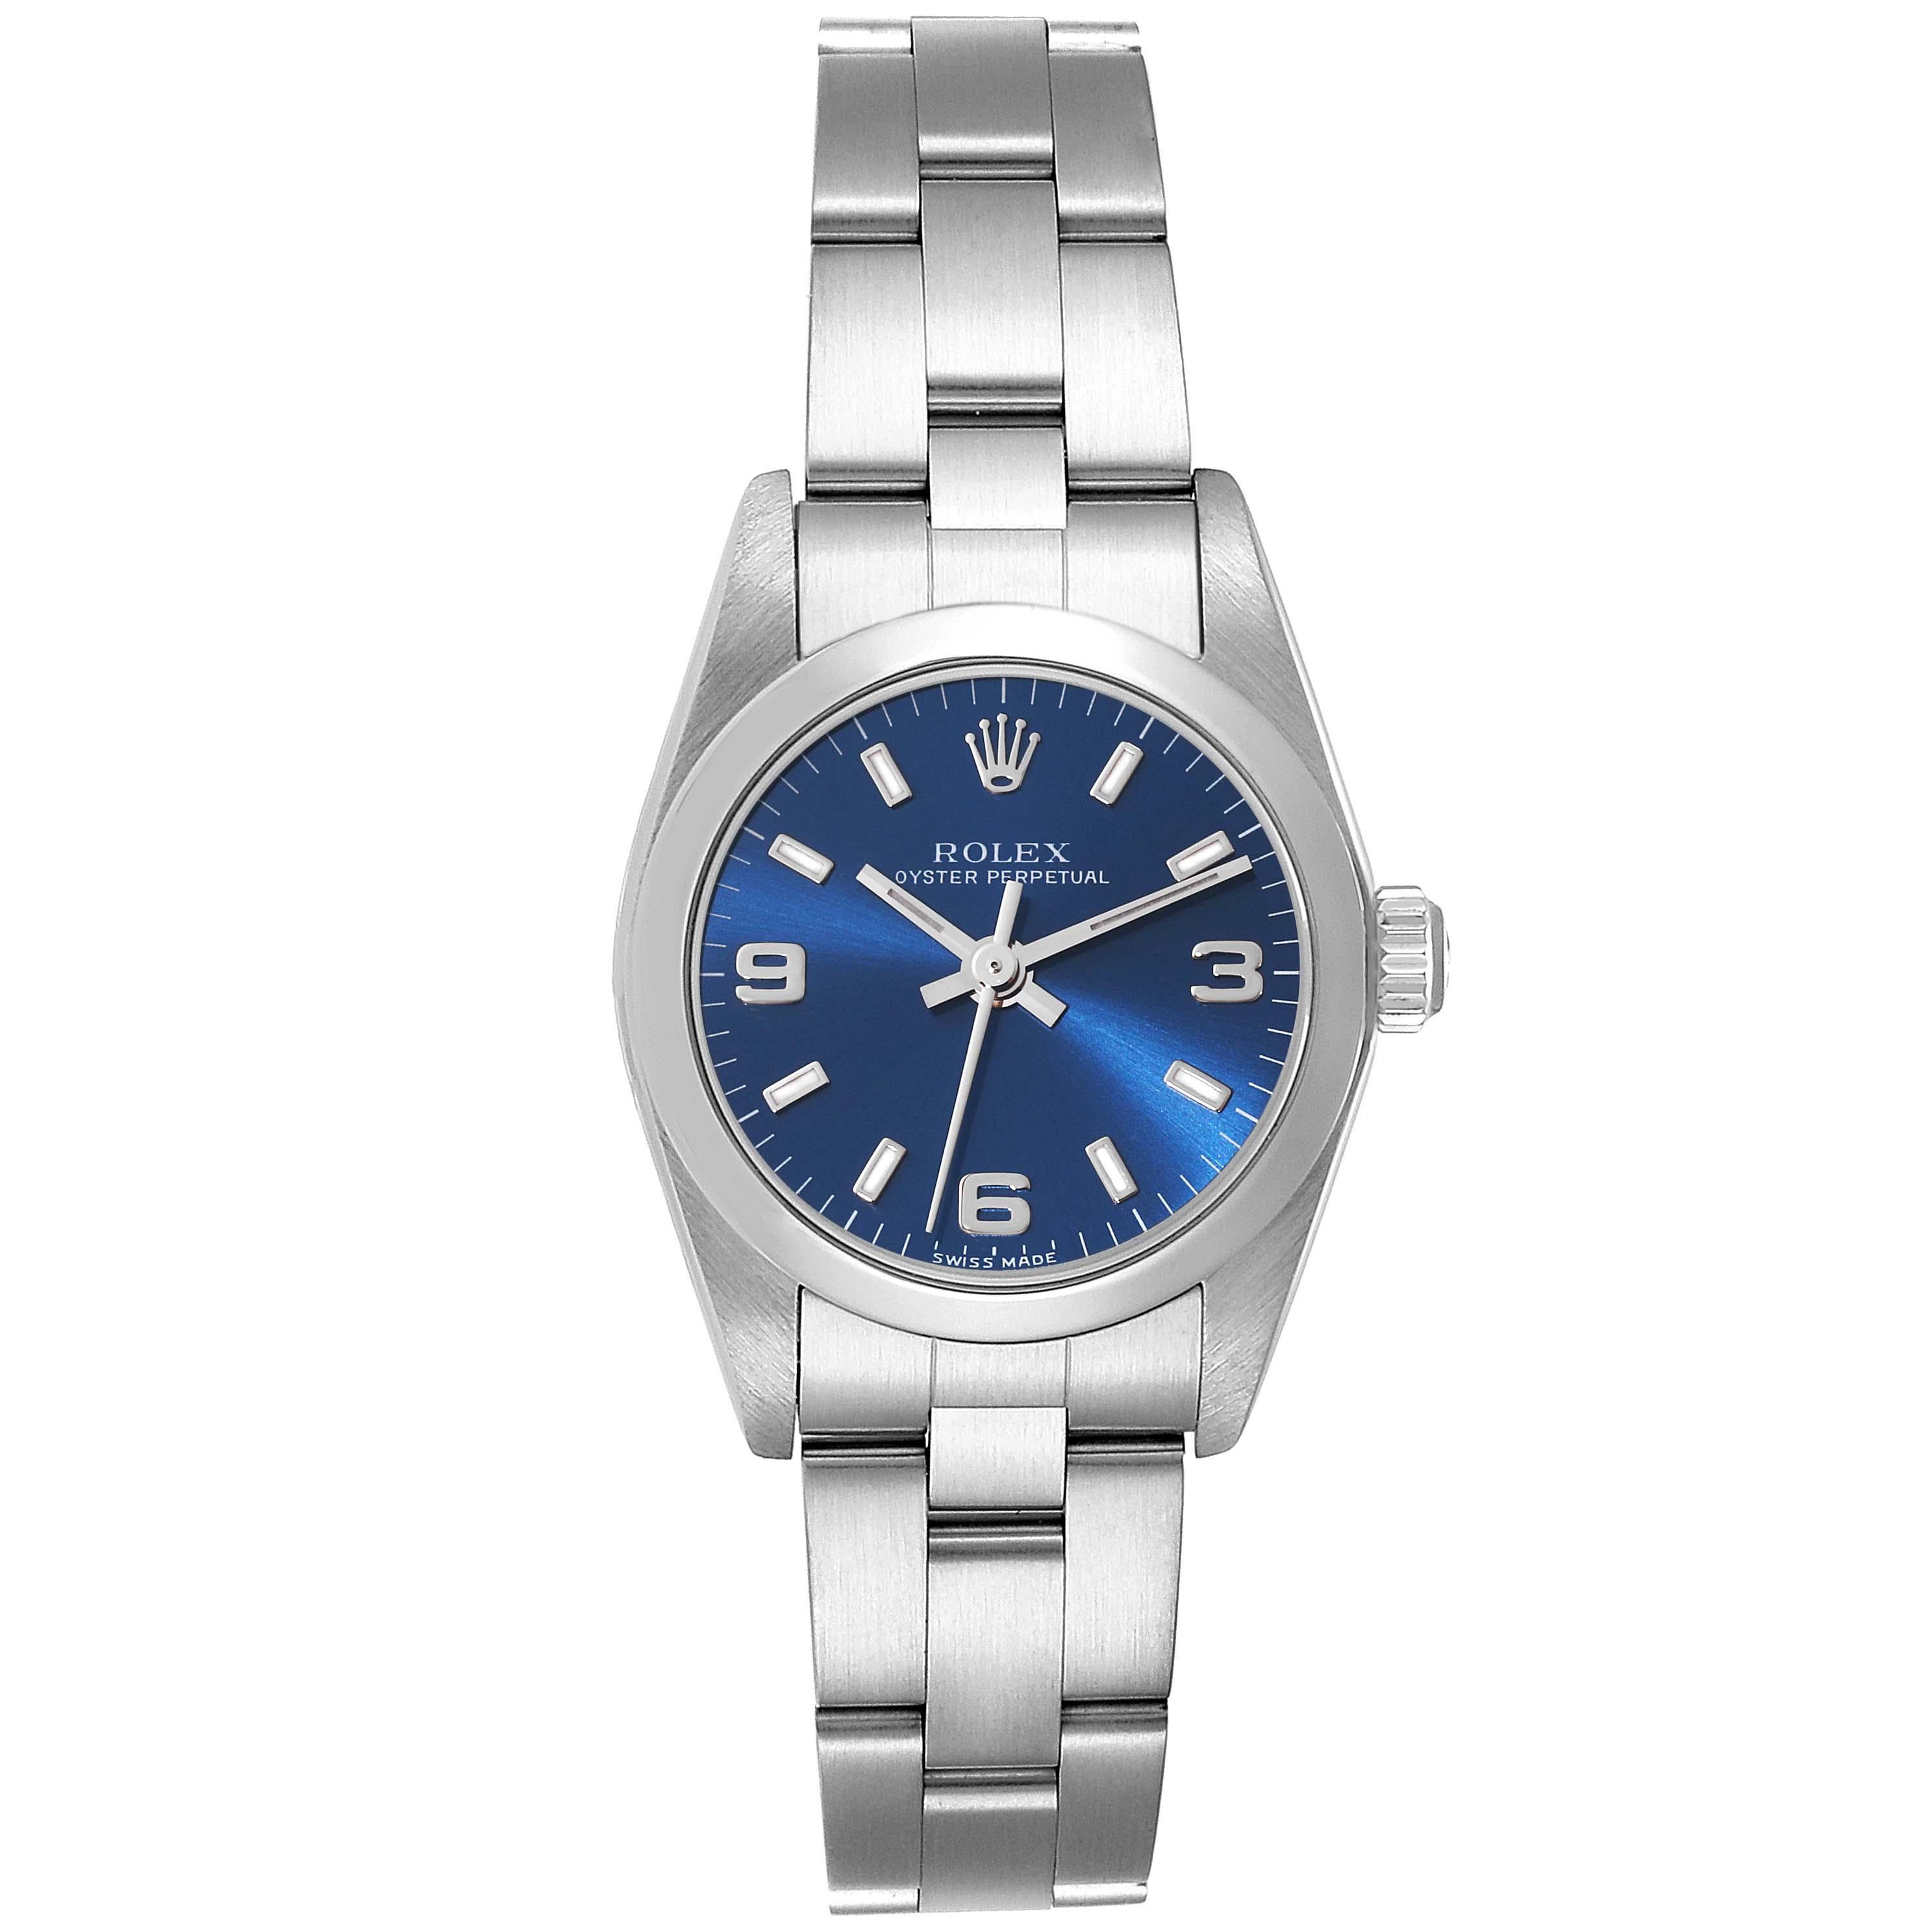 Rolex Oyster Perpetual Nondate Blue Dial Steel Ladies Watch 76080. Officially certified chronometer automatic self-winding movement. Stainless steel oyster case 24.0 mm in diameter. Rolex logo on a crown. Stainless steel smooth domed bezel. Scratch